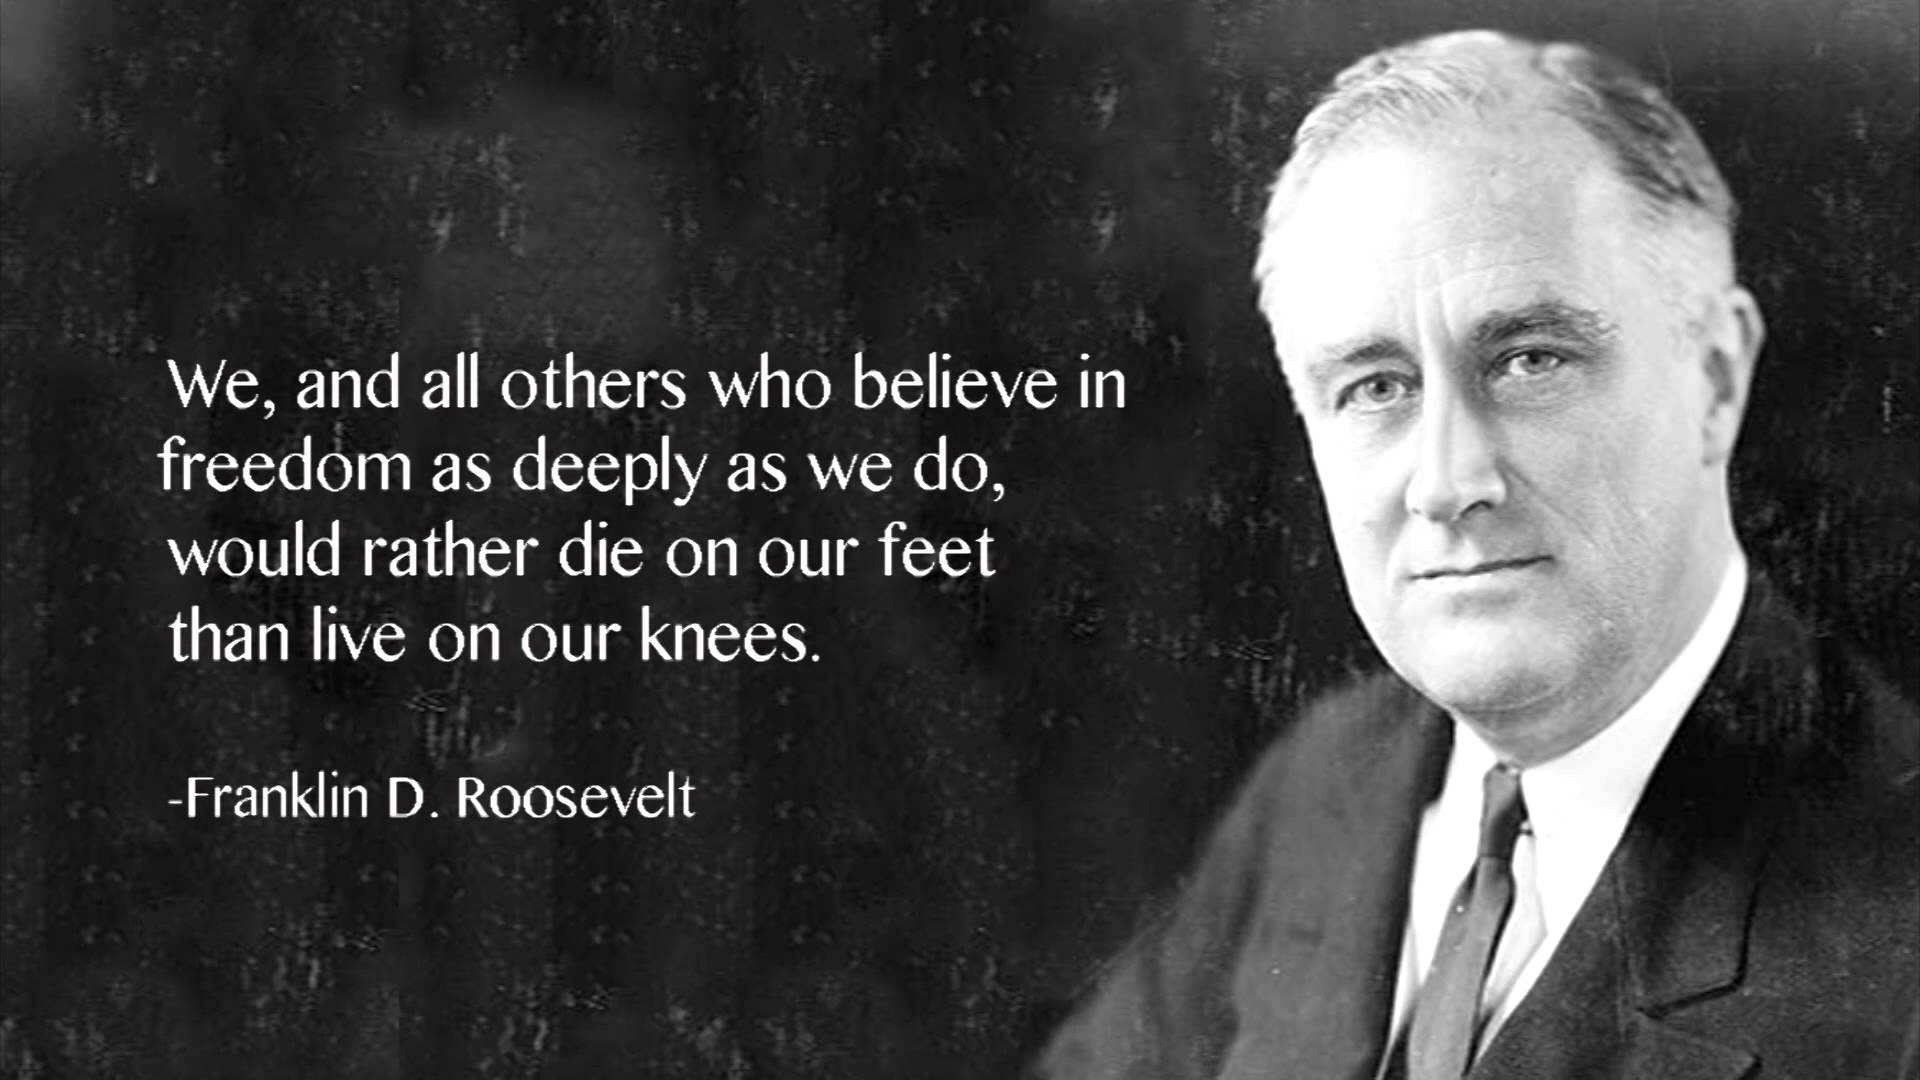 We and all others who believe in freedom as deeply as we do, would rather die on our feet than live on our knees. Franklin D. Roosevelt